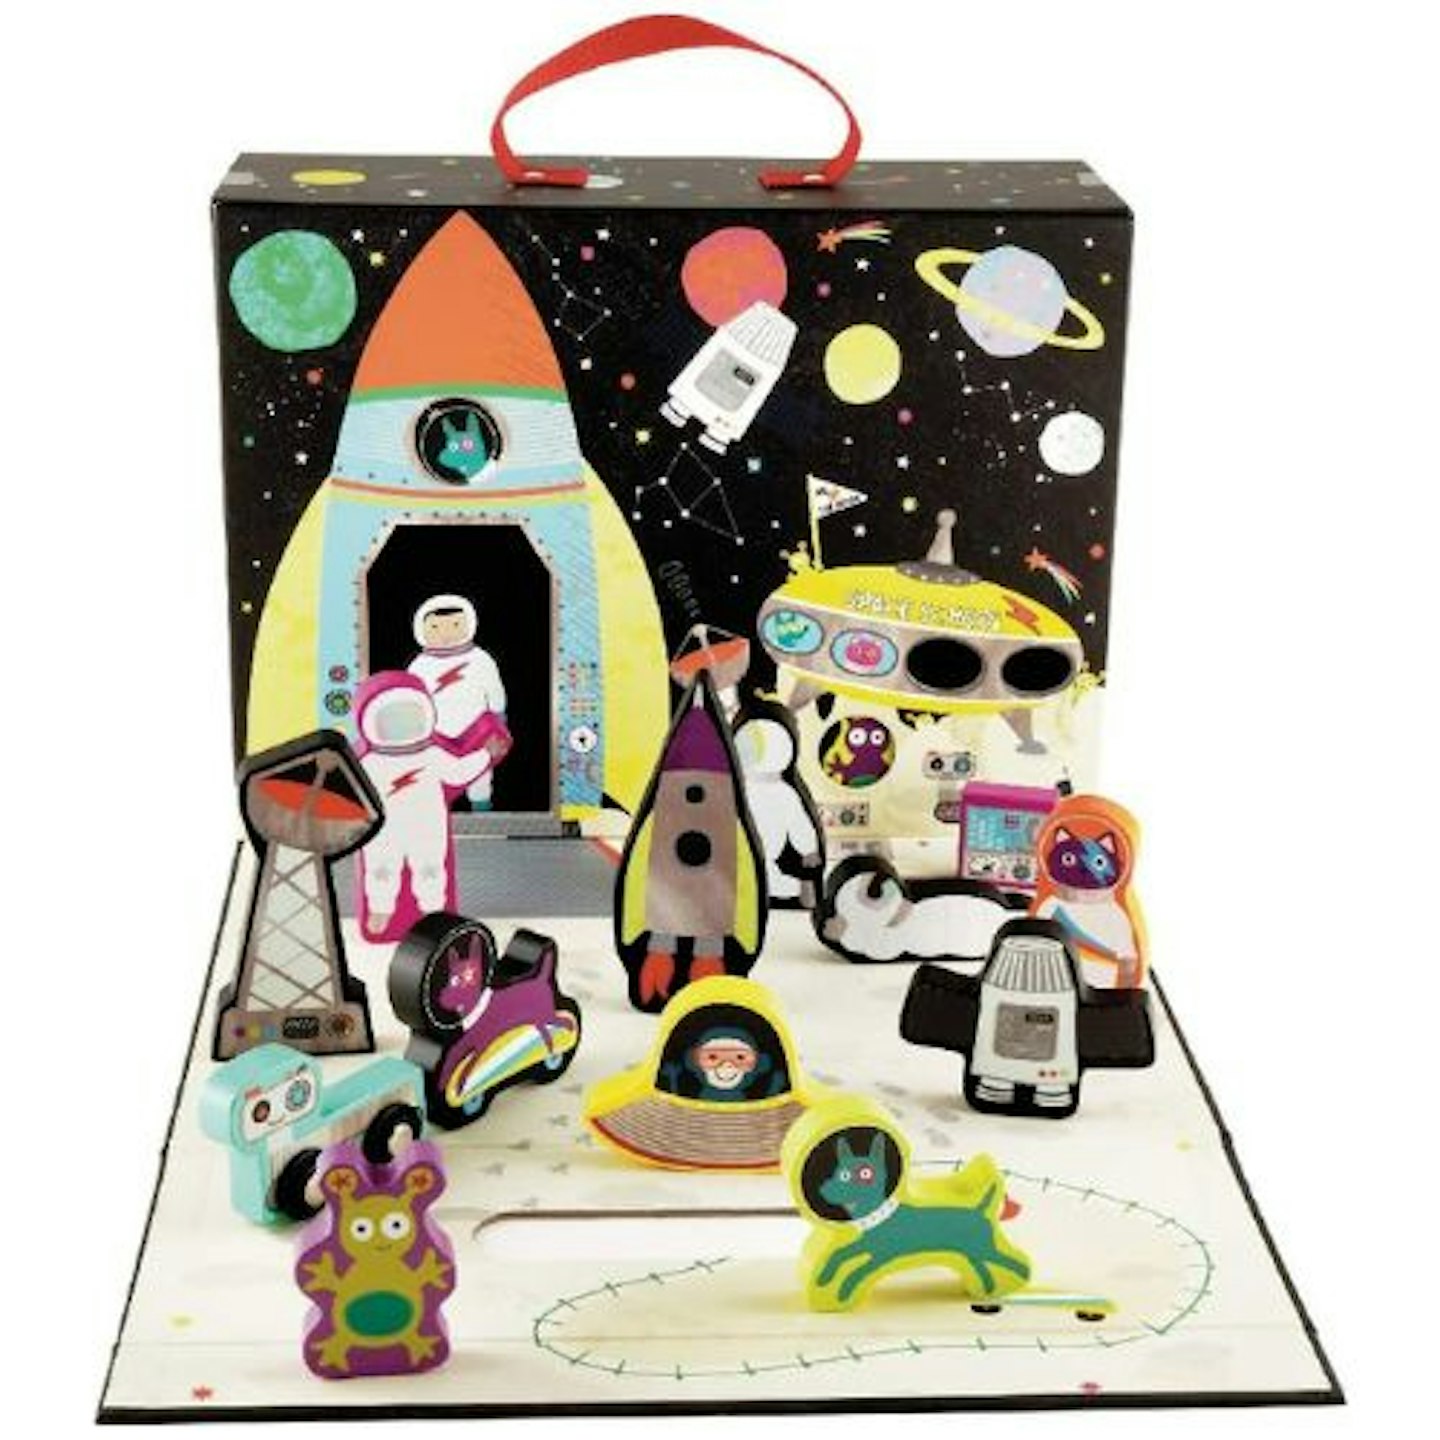 Floss & Rock Space Playbox Toy